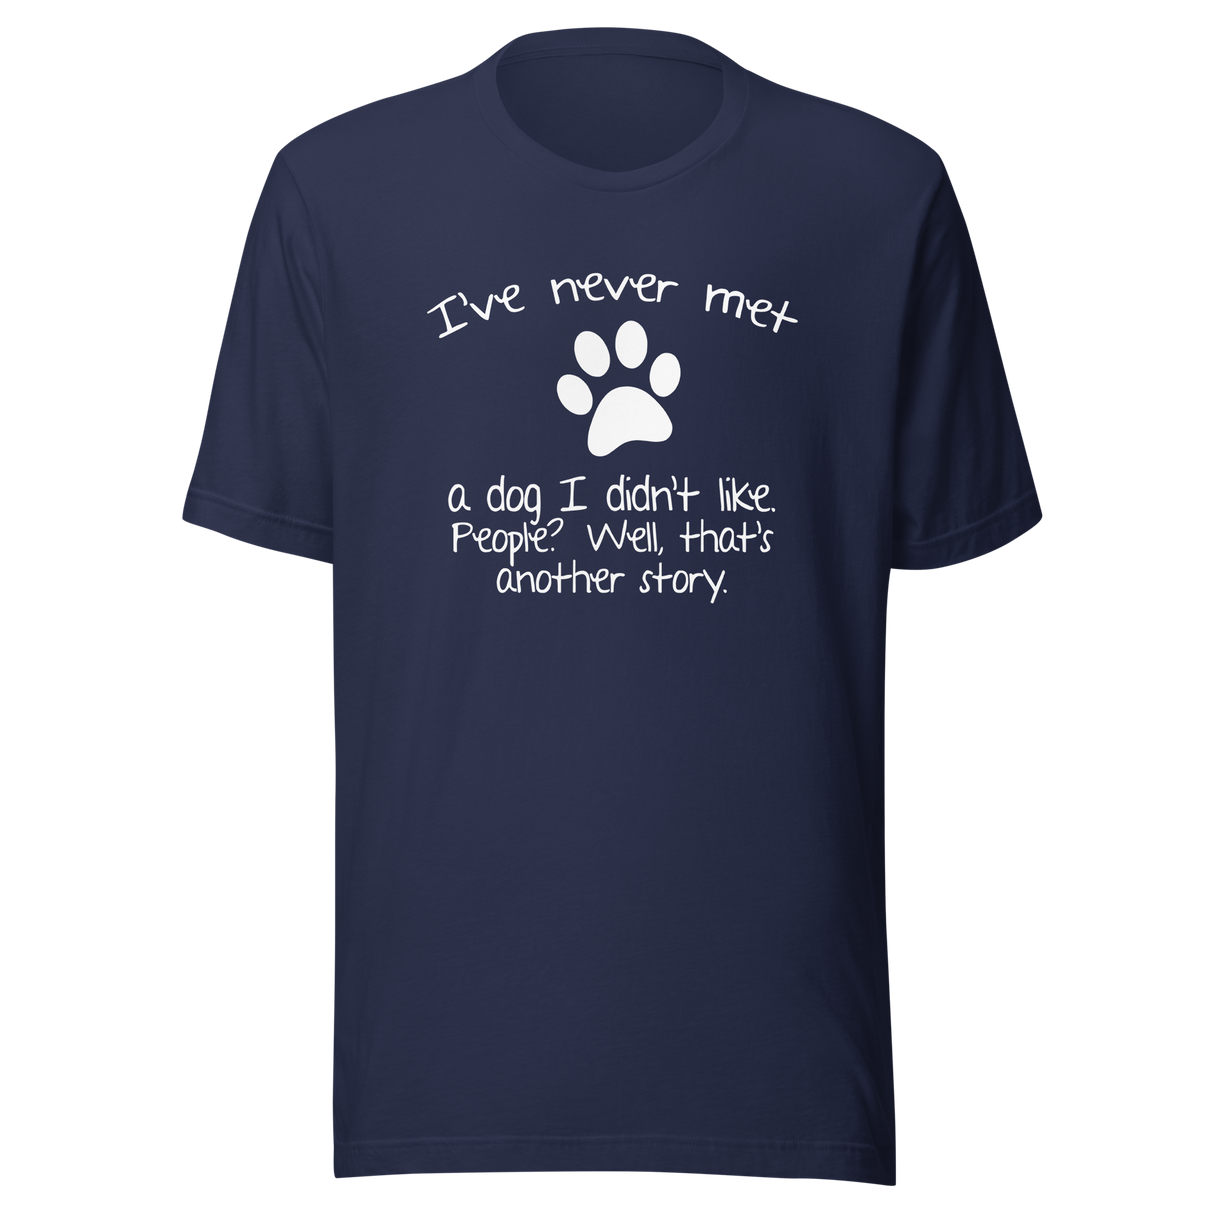 ive-never-met-a-dog-i-didnt-like-people-now-thats-another-story-dog-tee-corgi-t-shirt-bone-tee-t-shirt-tee#color_navy